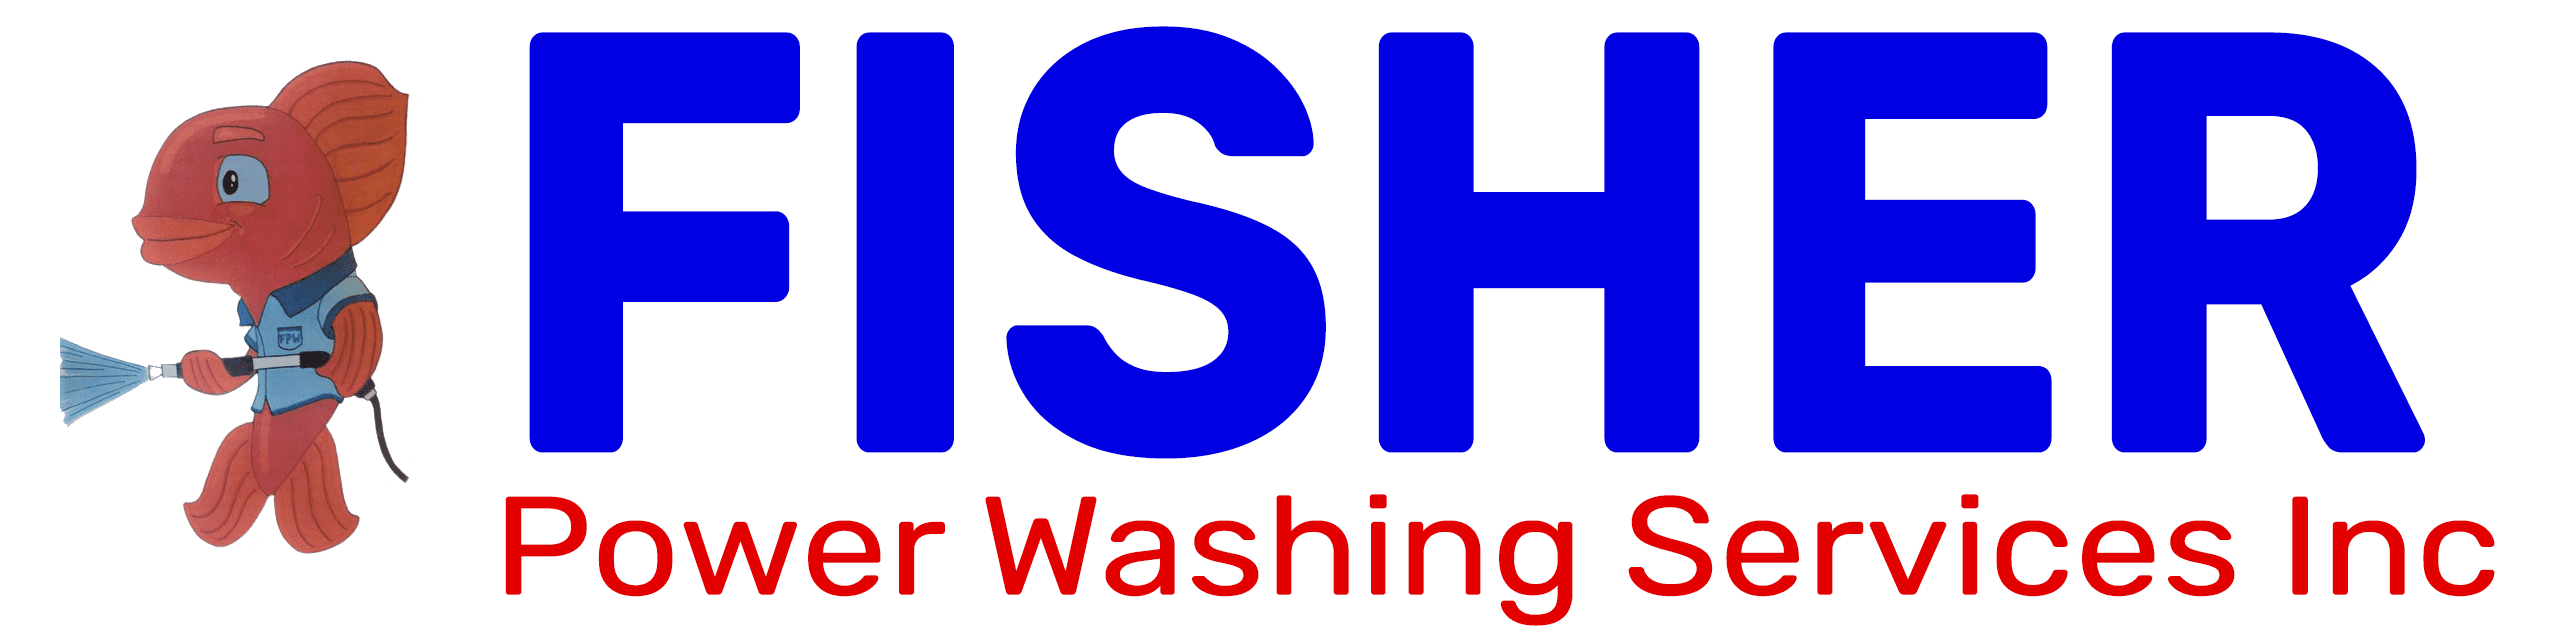 Fisher Power Washing Services Inc